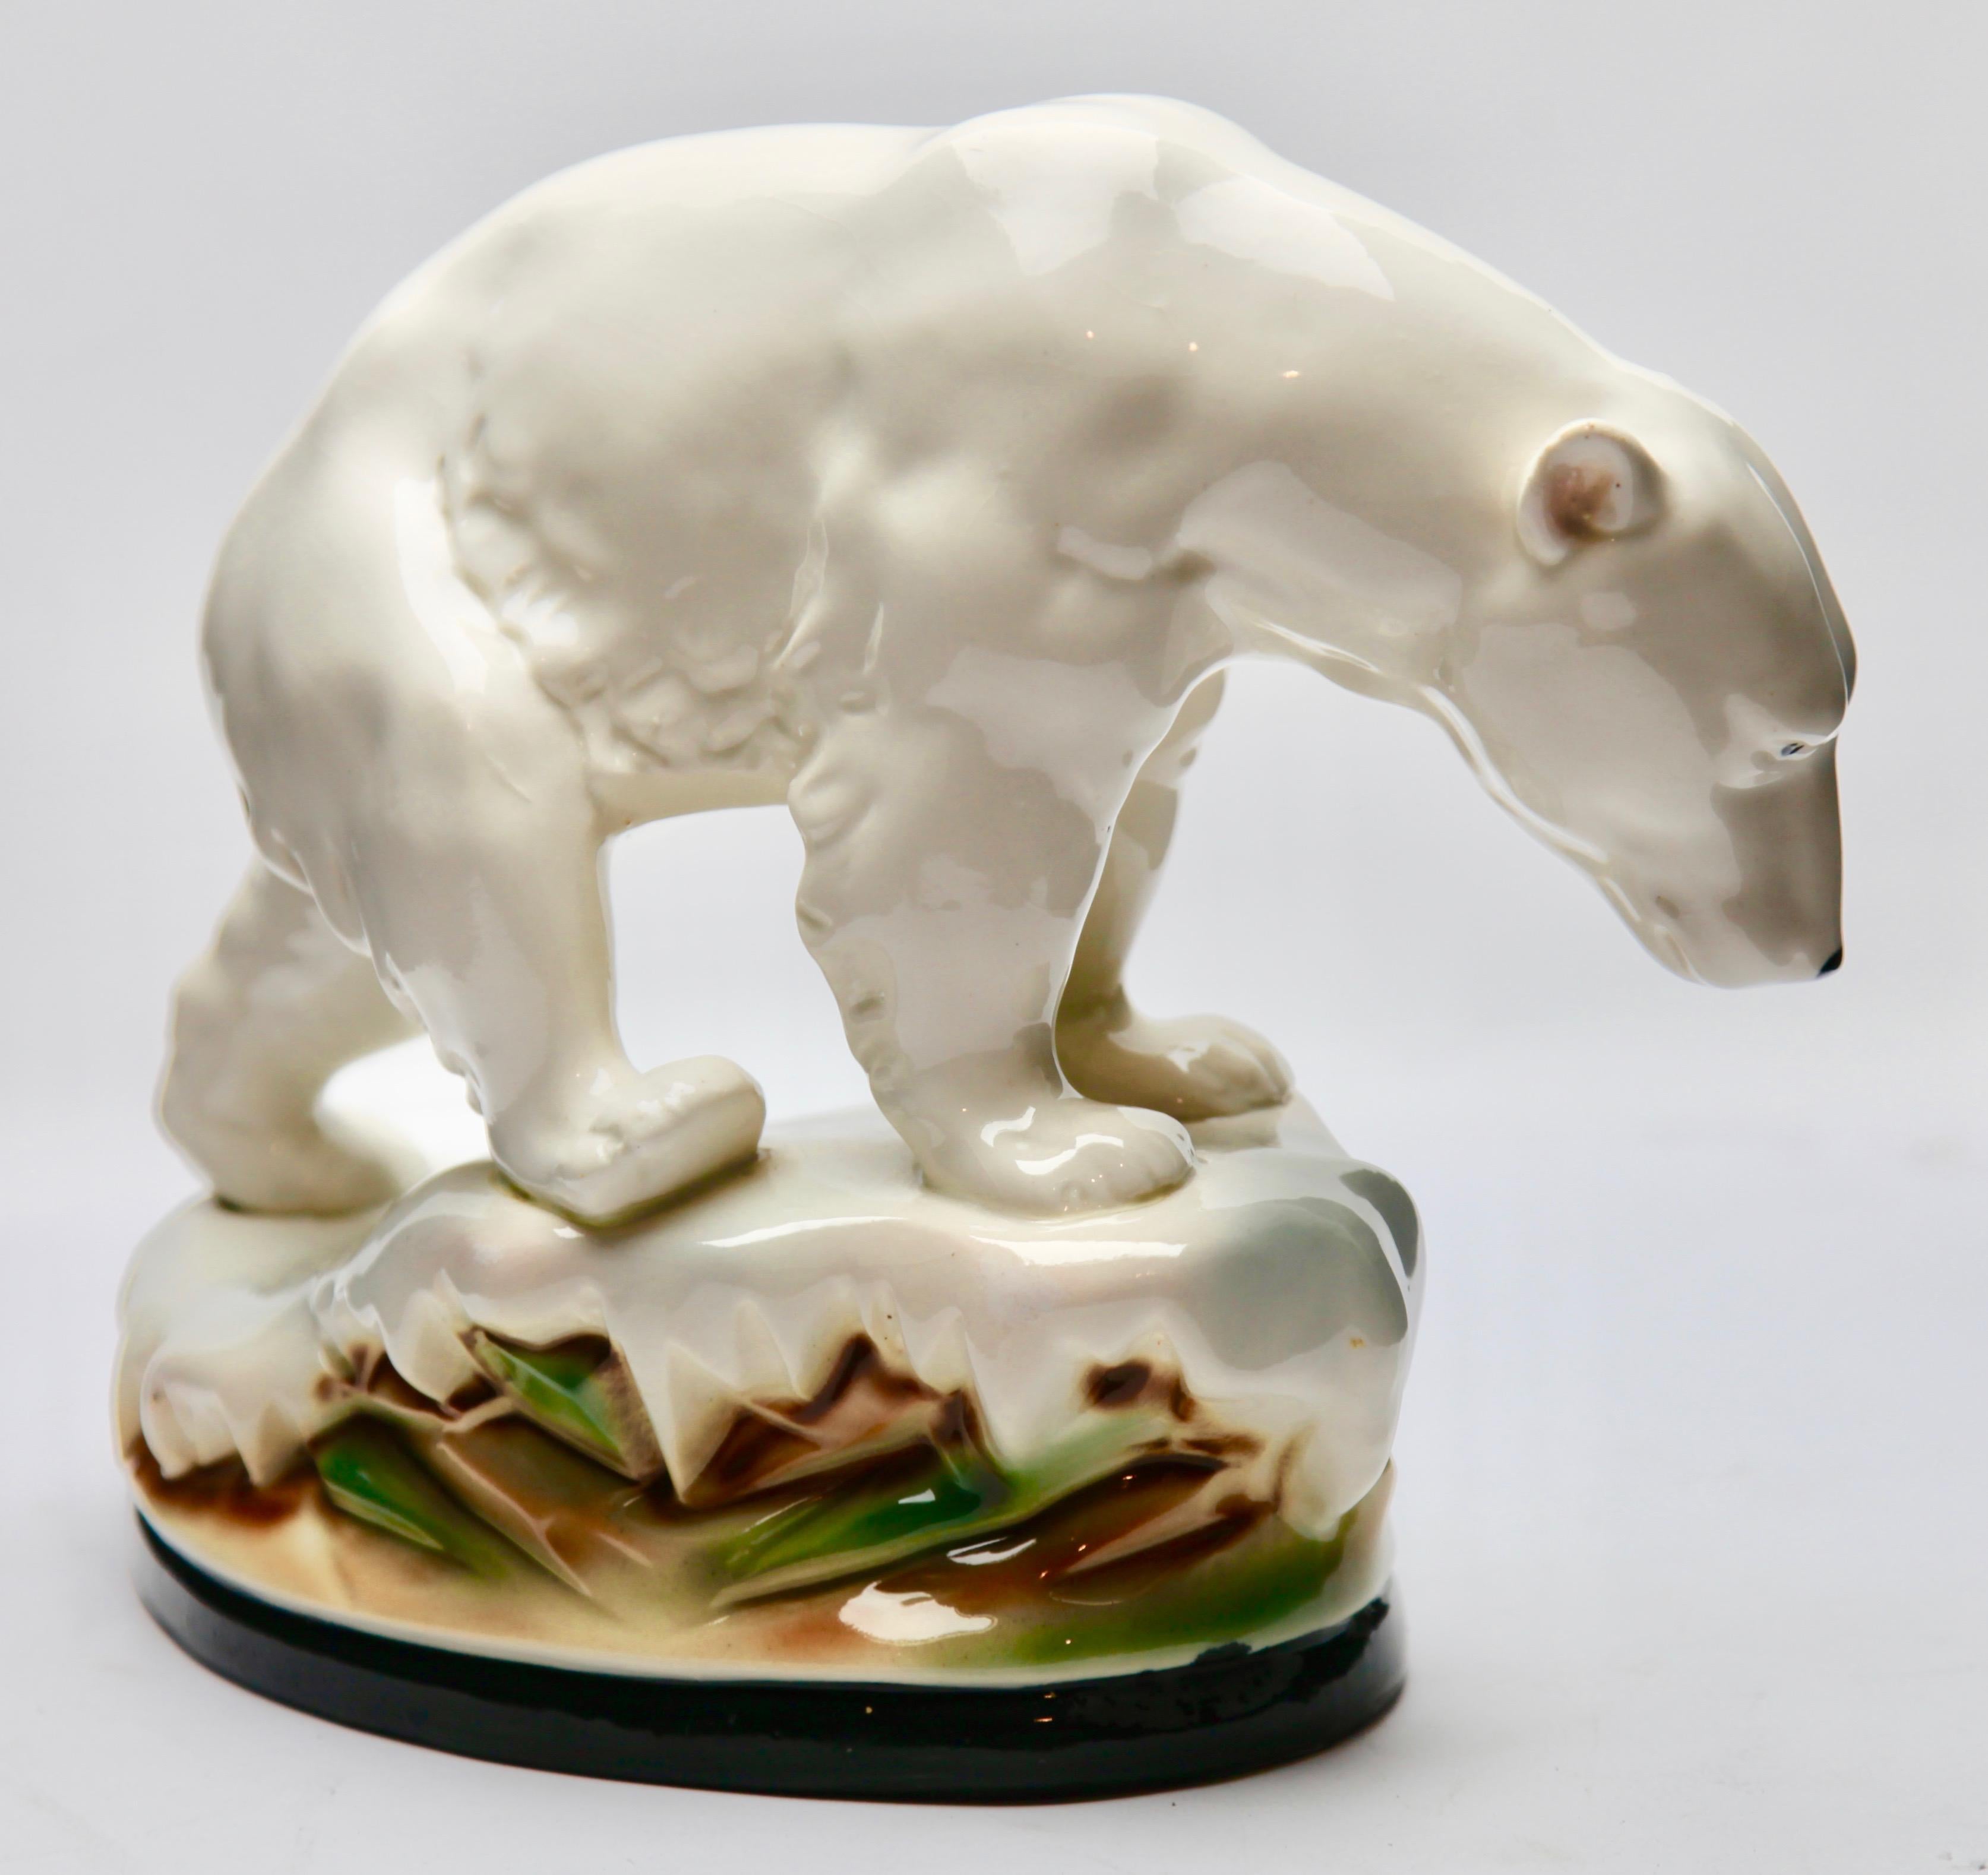 Naturalistic figurine in white glazed porcelain. Finely detailed and modeled hand painted figurine of a polar bear on an icy outcrop. 
Attributed to various German factories but correct identity is unclear. No maker's mark, but impressed number on